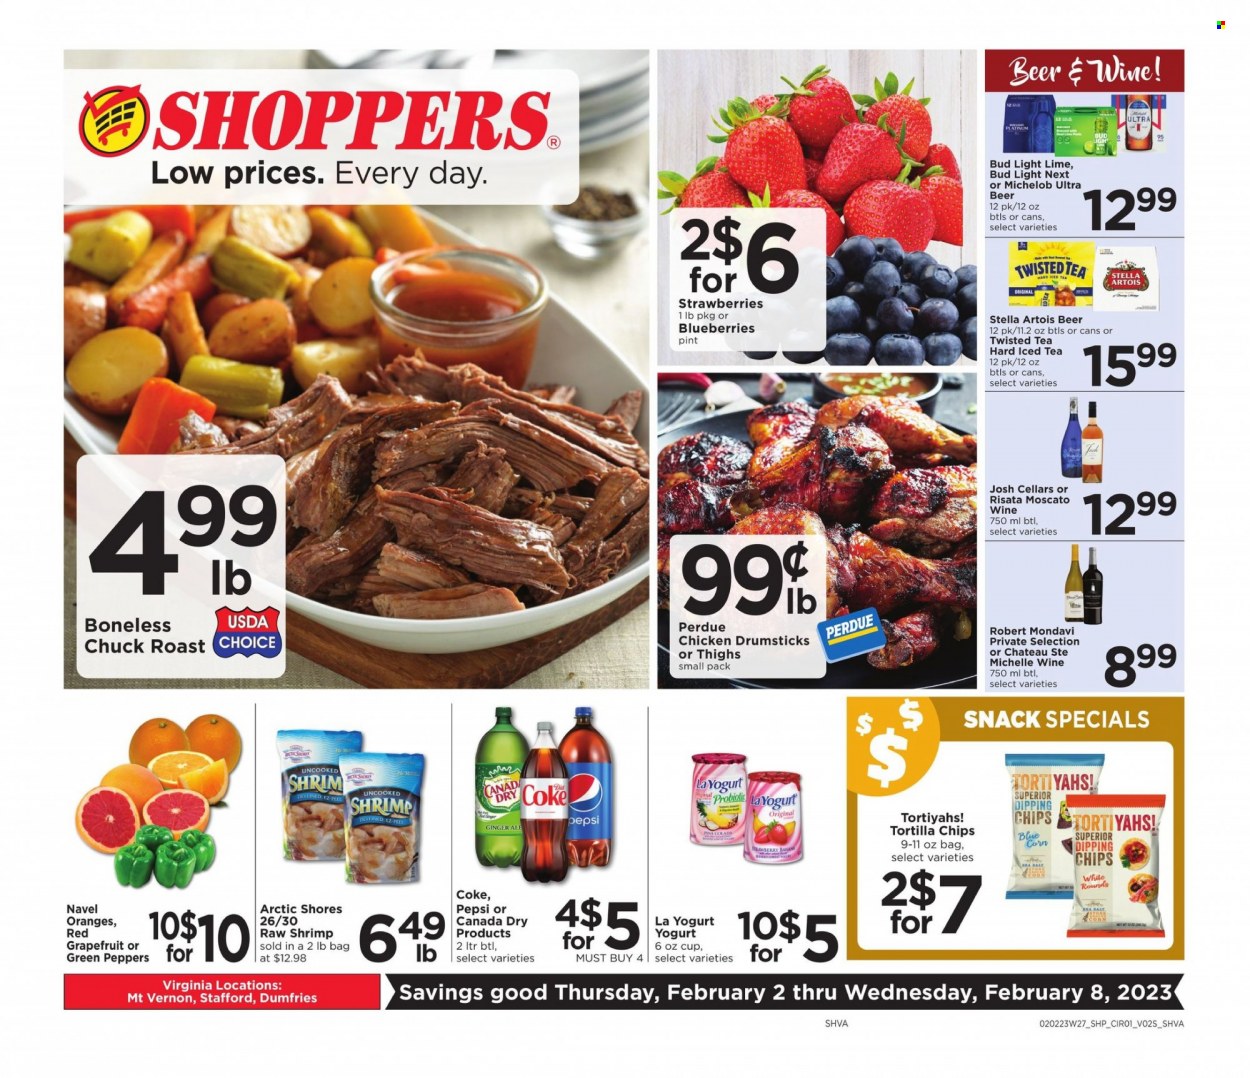 thumbnail - Shoppers Flyer - 02/02/2023 - 02/08/2023 - Sales products - corn, peppers, blueberries, grapefruits, oranges, shrimps, Arctic Shores, Perdue®, yoghurt, snack, tortilla chips, chips, Canada Dry, Coca-Cola, ginger ale, Pepsi, ice tea, wine, Moscato, beer, Stella Artois, Bud Light, chicken drumsticks, beef meat, chuck roast, Twisted Tea, Michelob, navel oranges. Page 1.